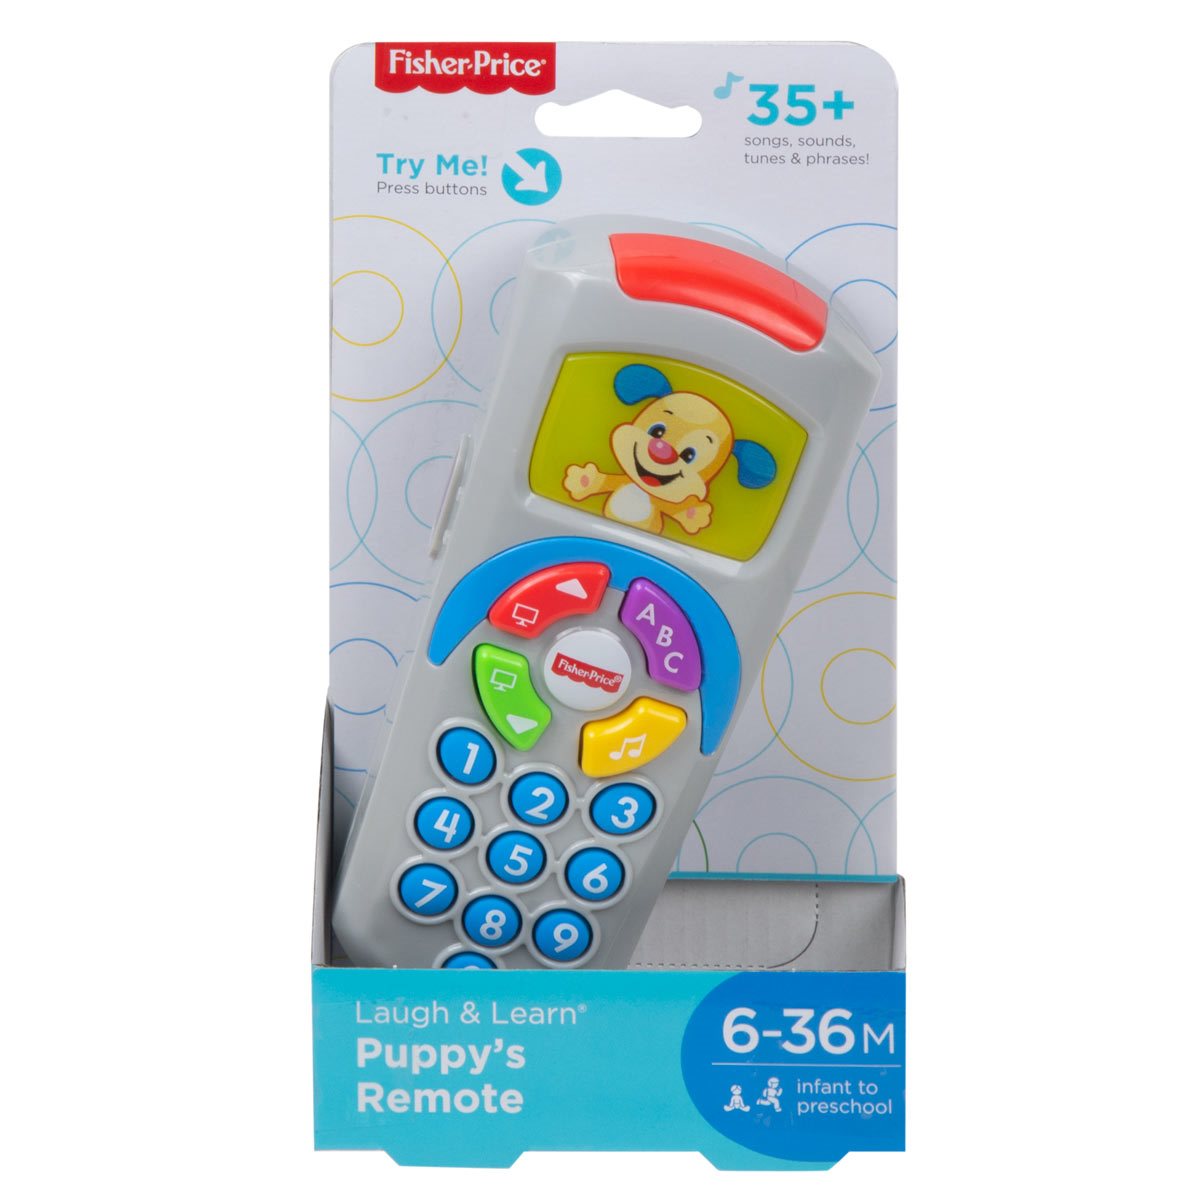 New Fisher Price Laugh & Learn Puppy's Remote Songs & Sounds Dmgd Box 